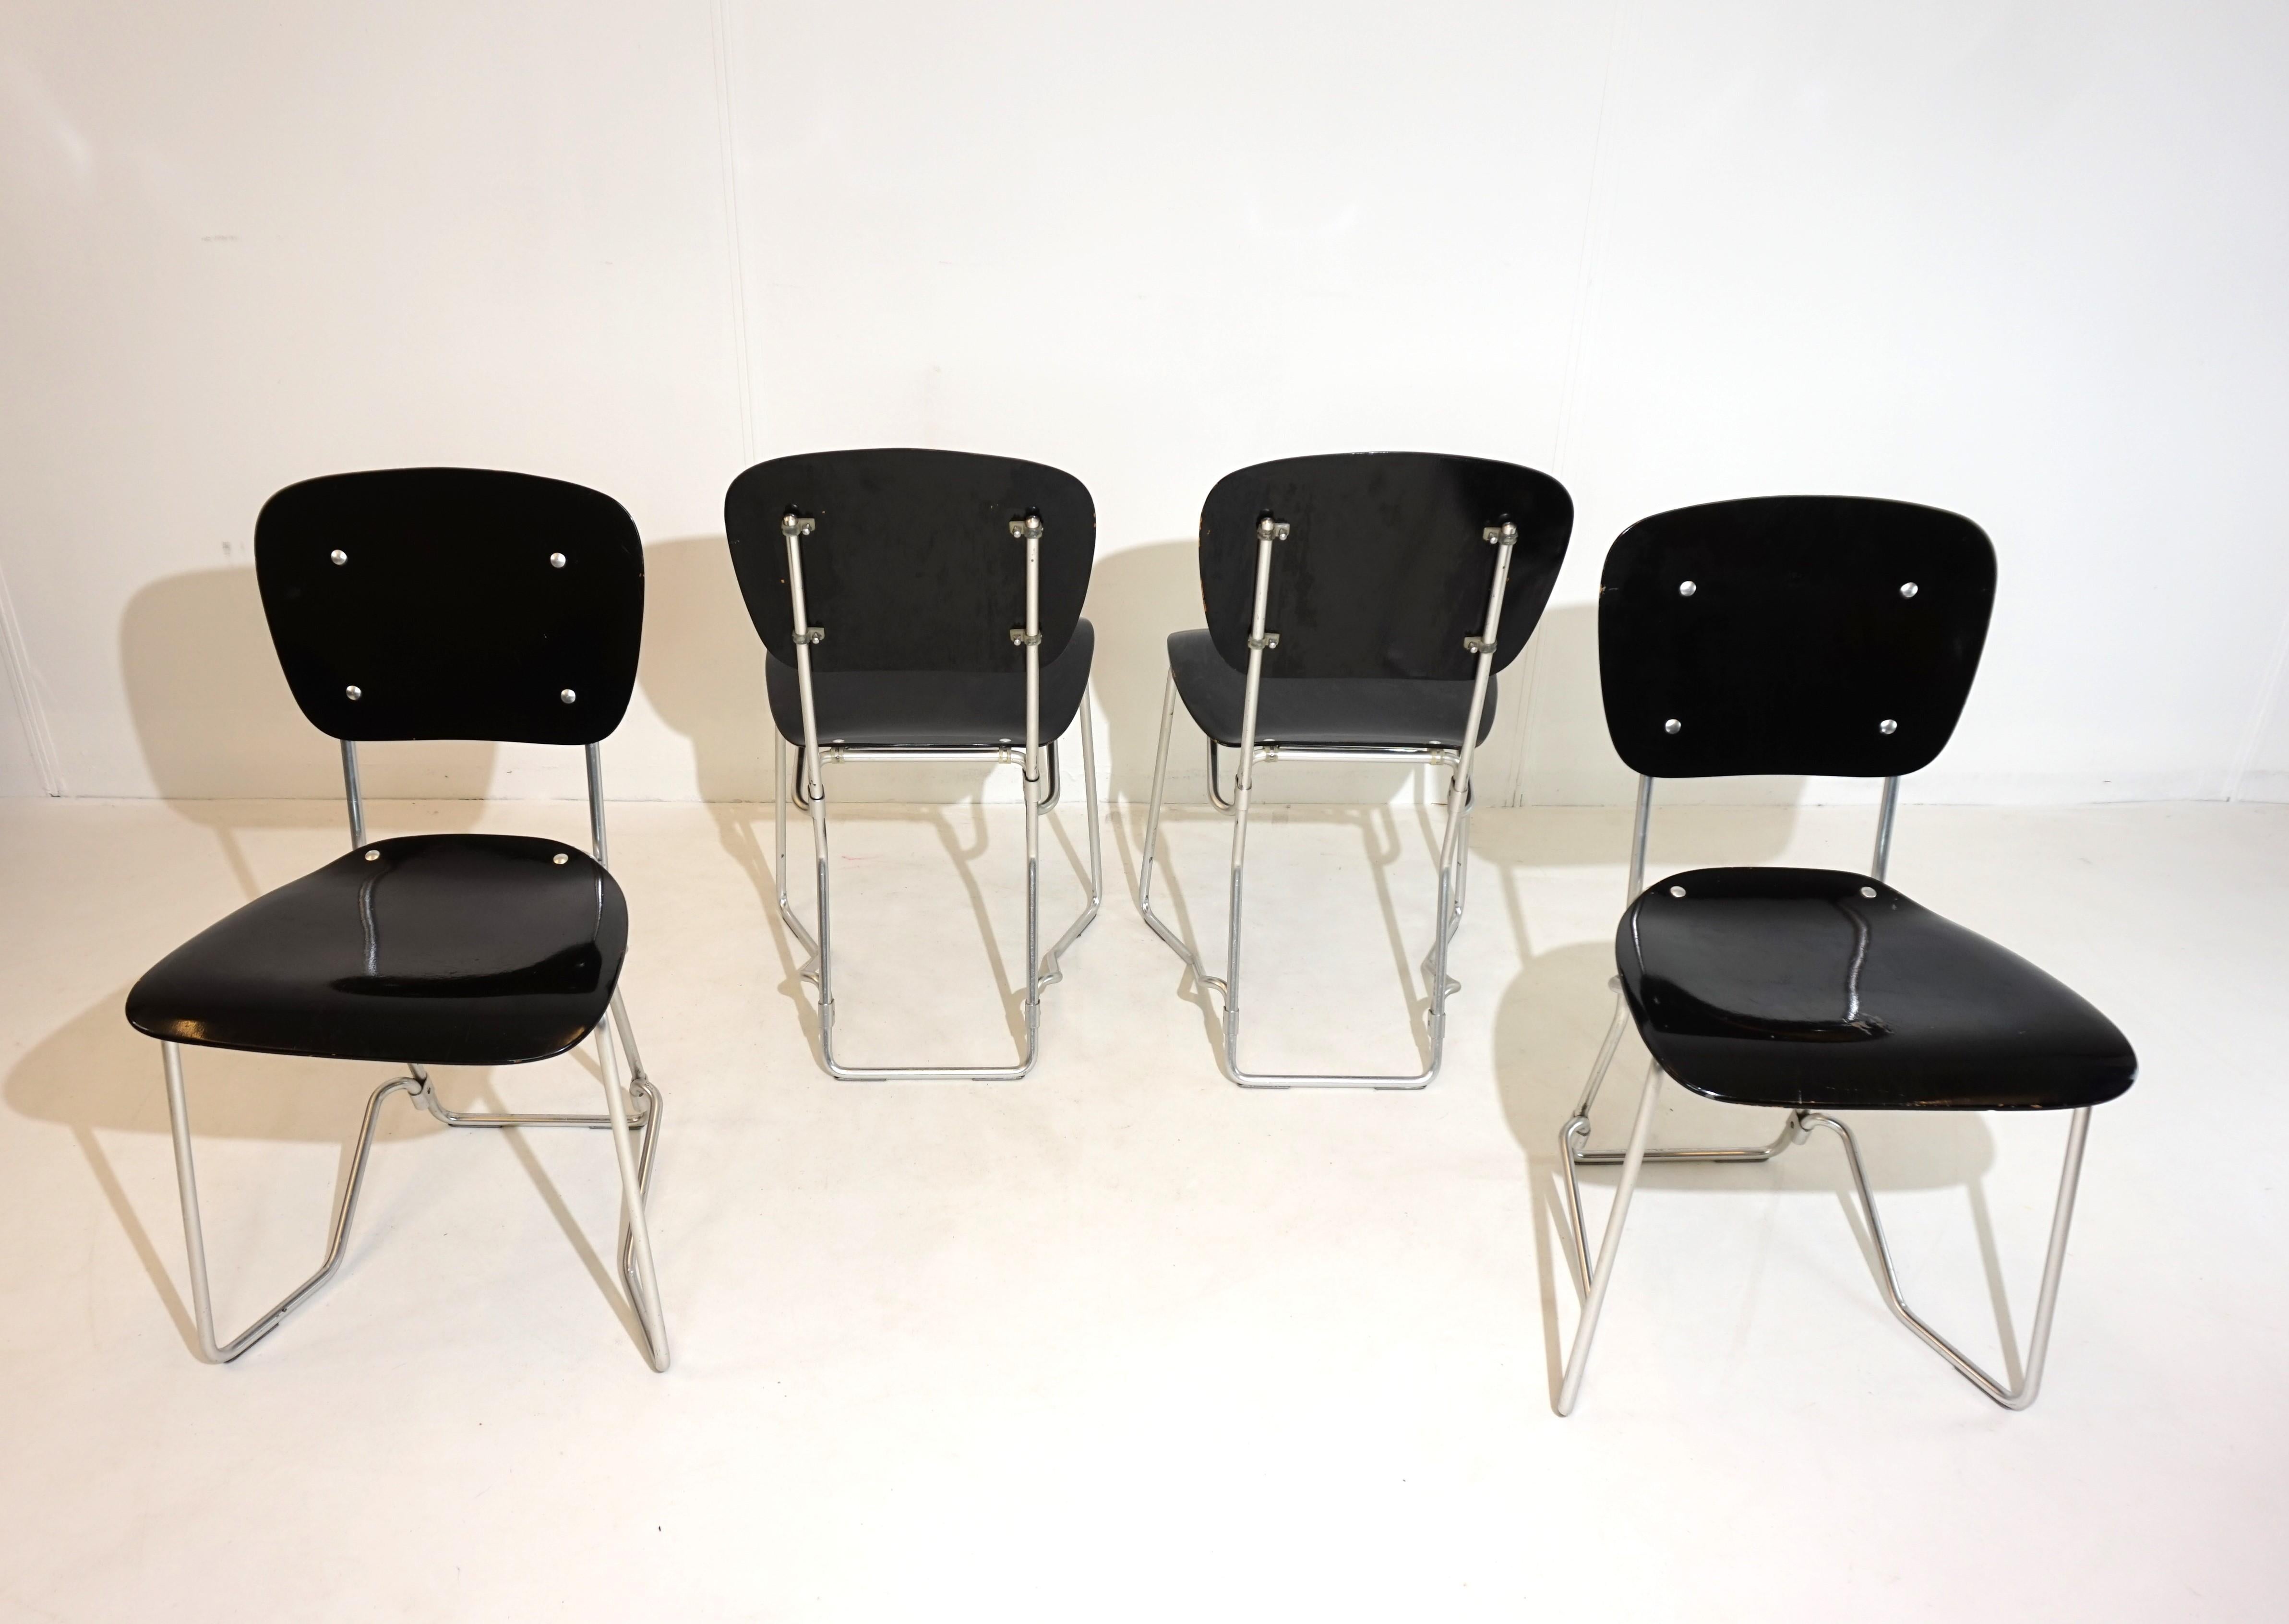 These design classics from the 50s, with the typical aluminum frame and black wood, are in good condition. The folding wooden seats and backrests have a beautiful appearance and show only minimal signs of wear.  One of the chairs has abrasion of the